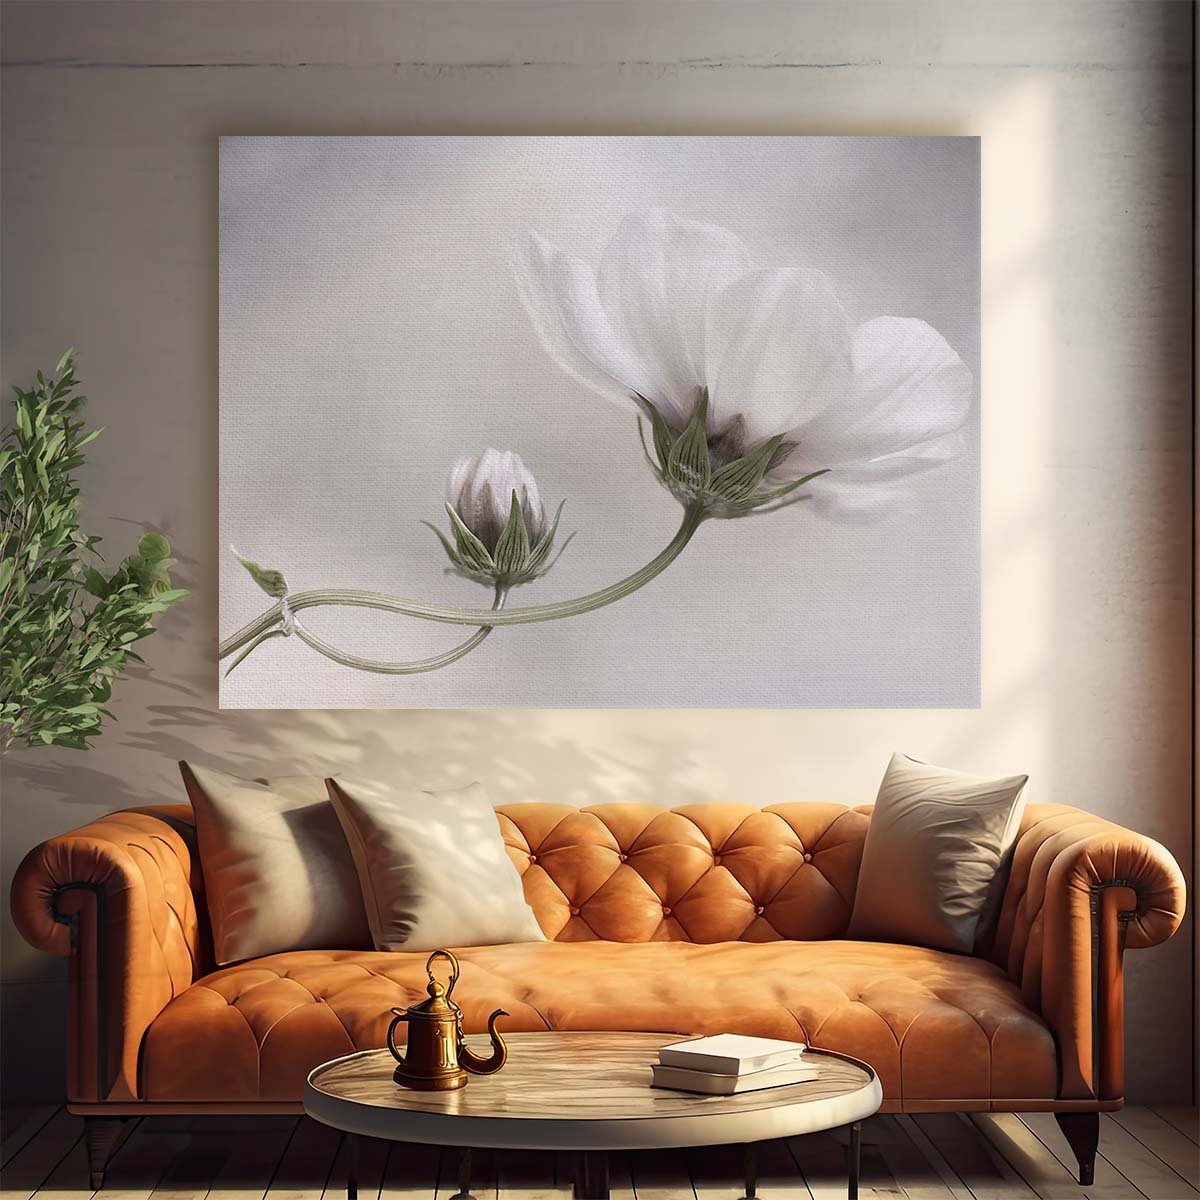 Delicate White Cosmos Flower Macro Photography Wall Art